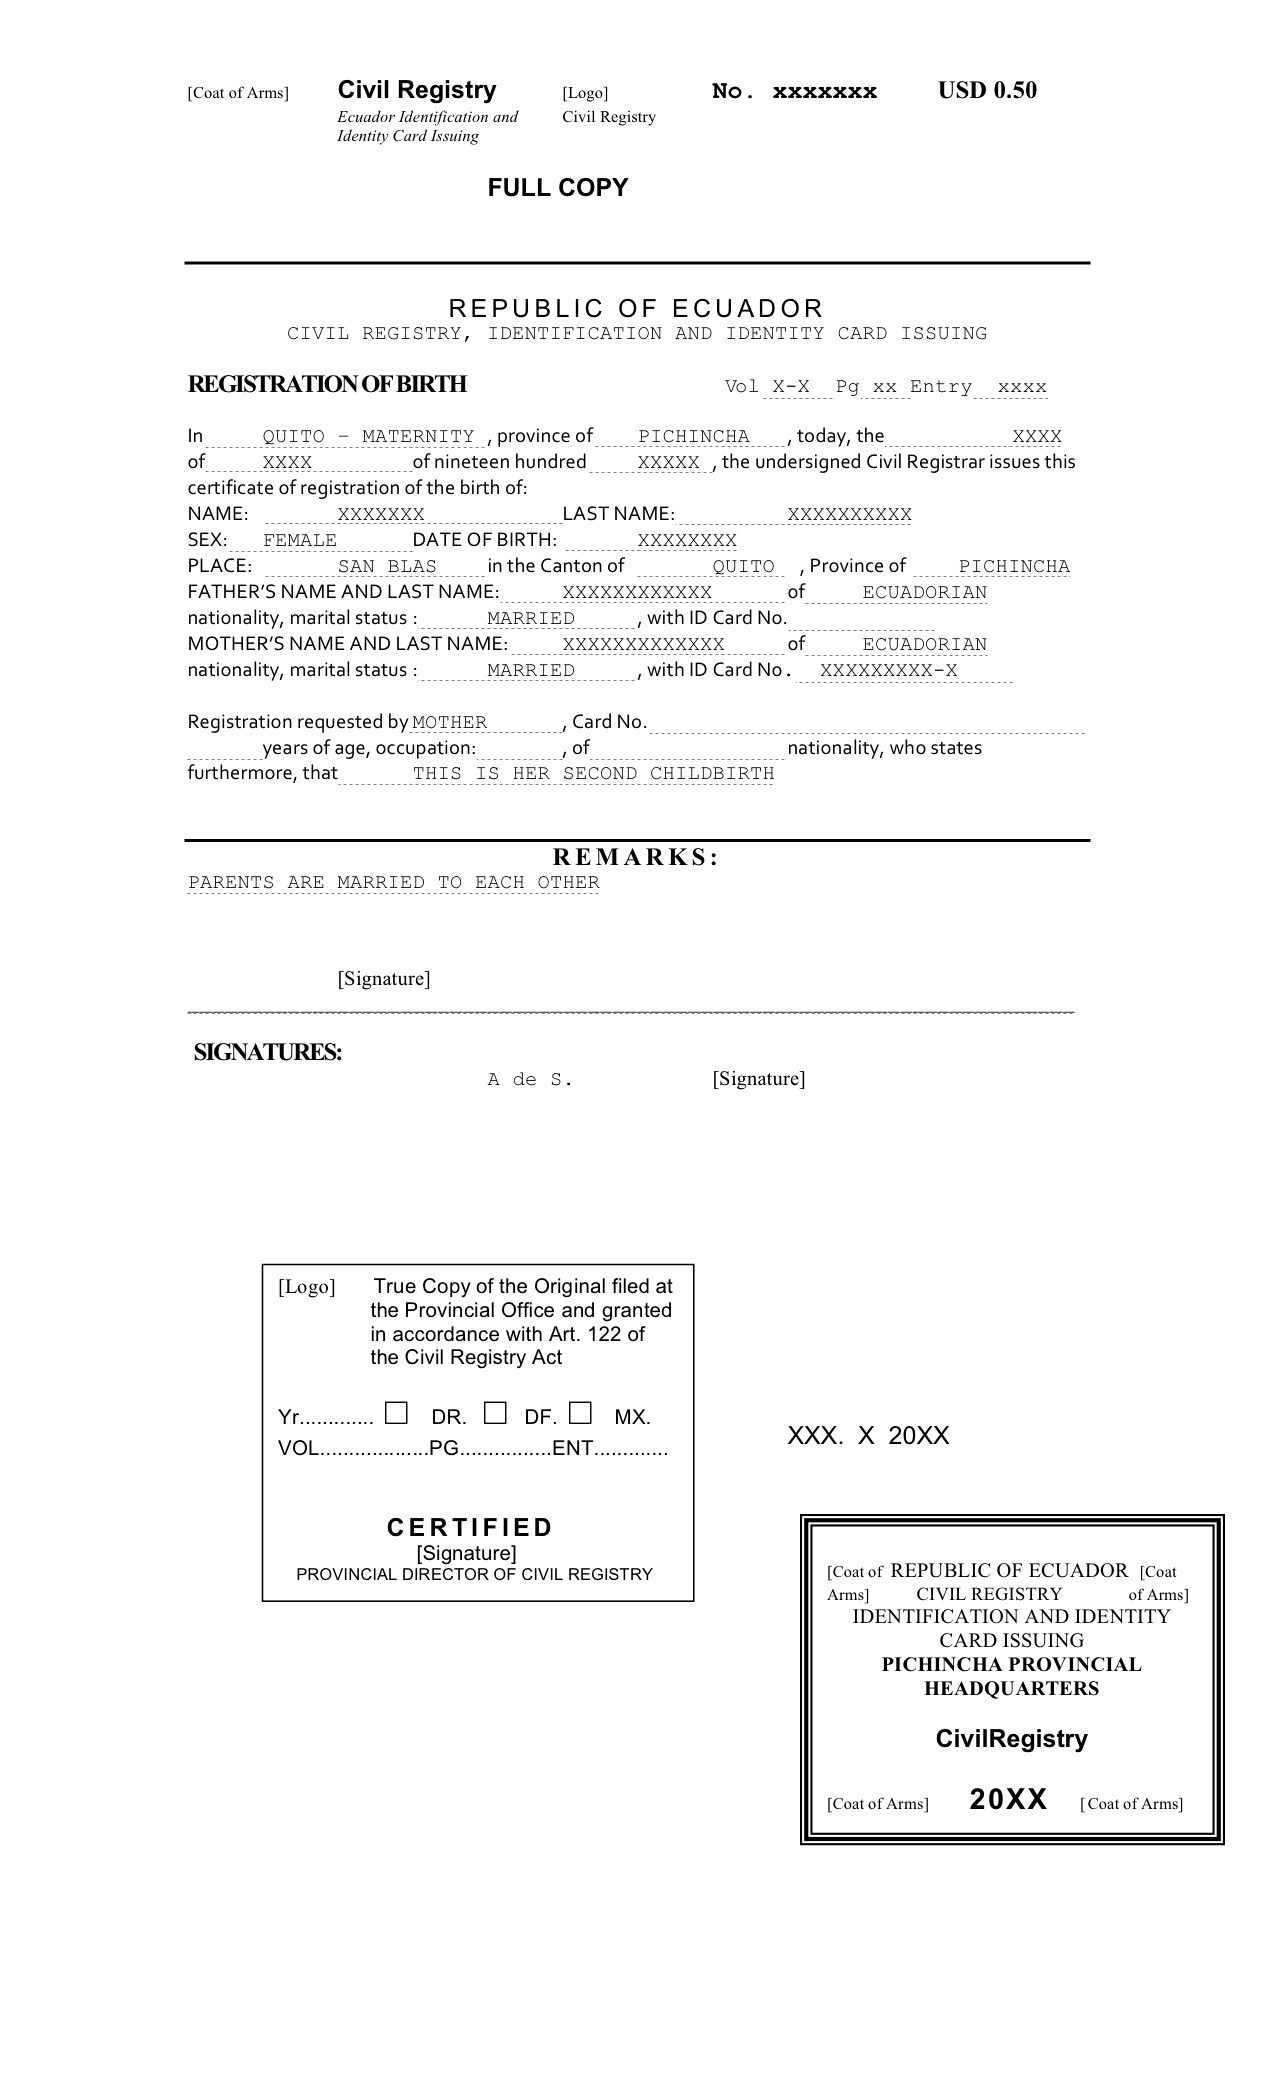 Death Certificate Translation From Spanish To English Sample In Marriage Certificate Translation From Spanish To English Template